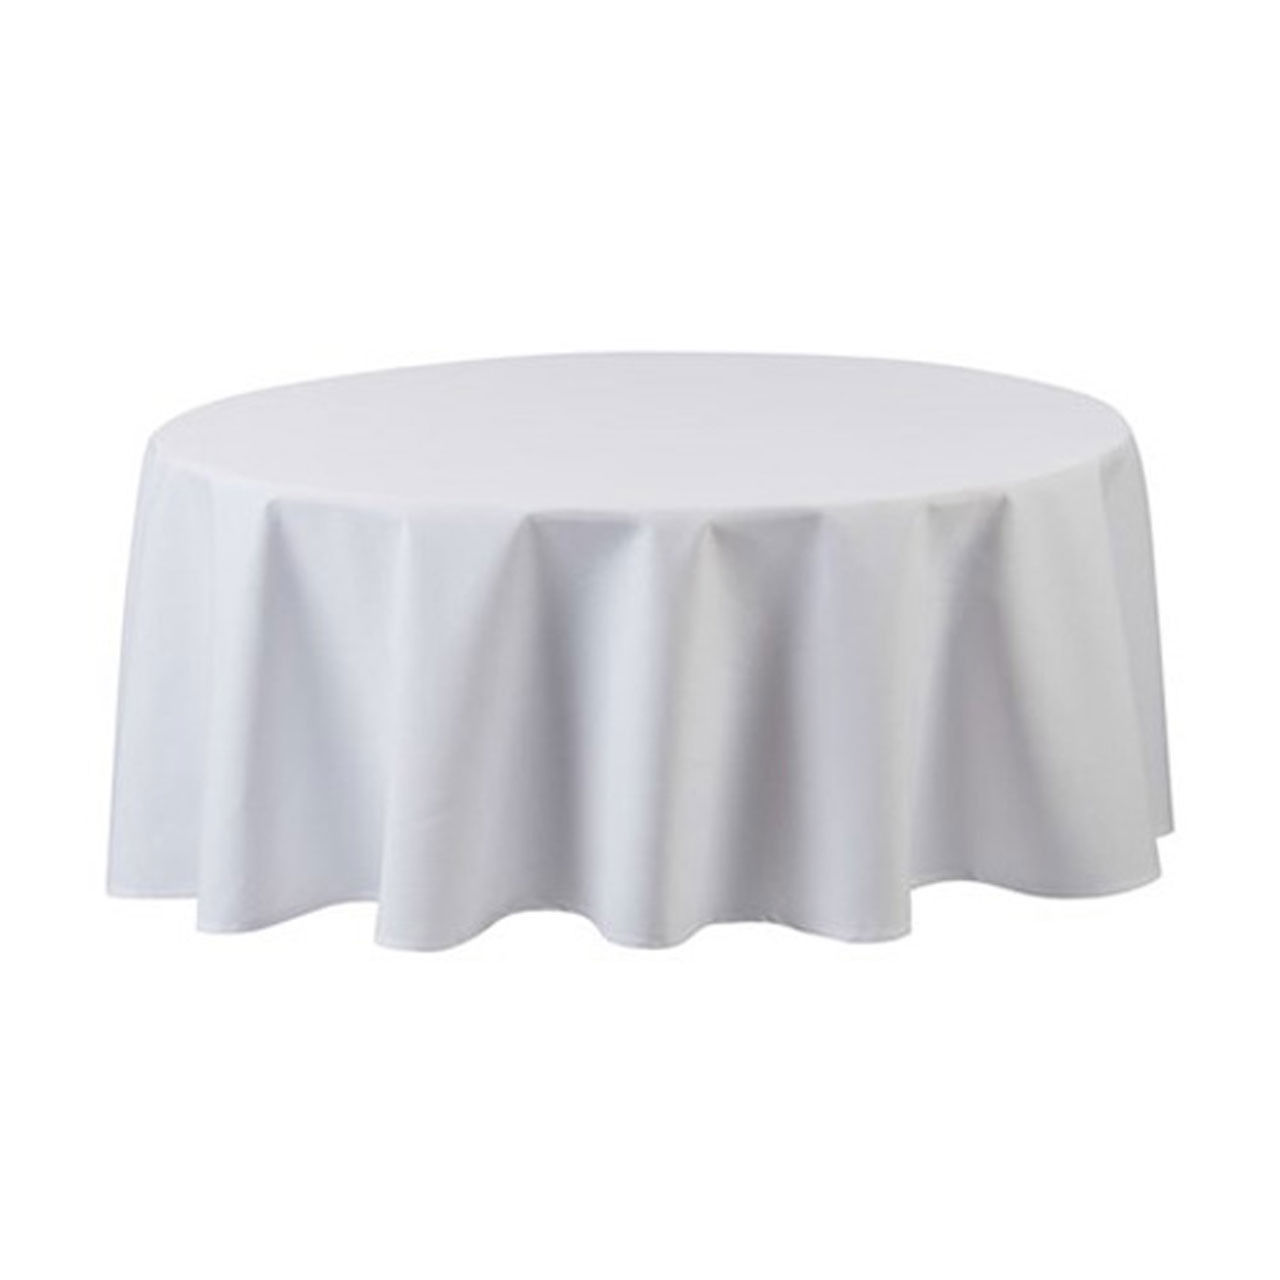 Our church uses heavy-duty plastic 84” round tablecloths , need best bulk price.